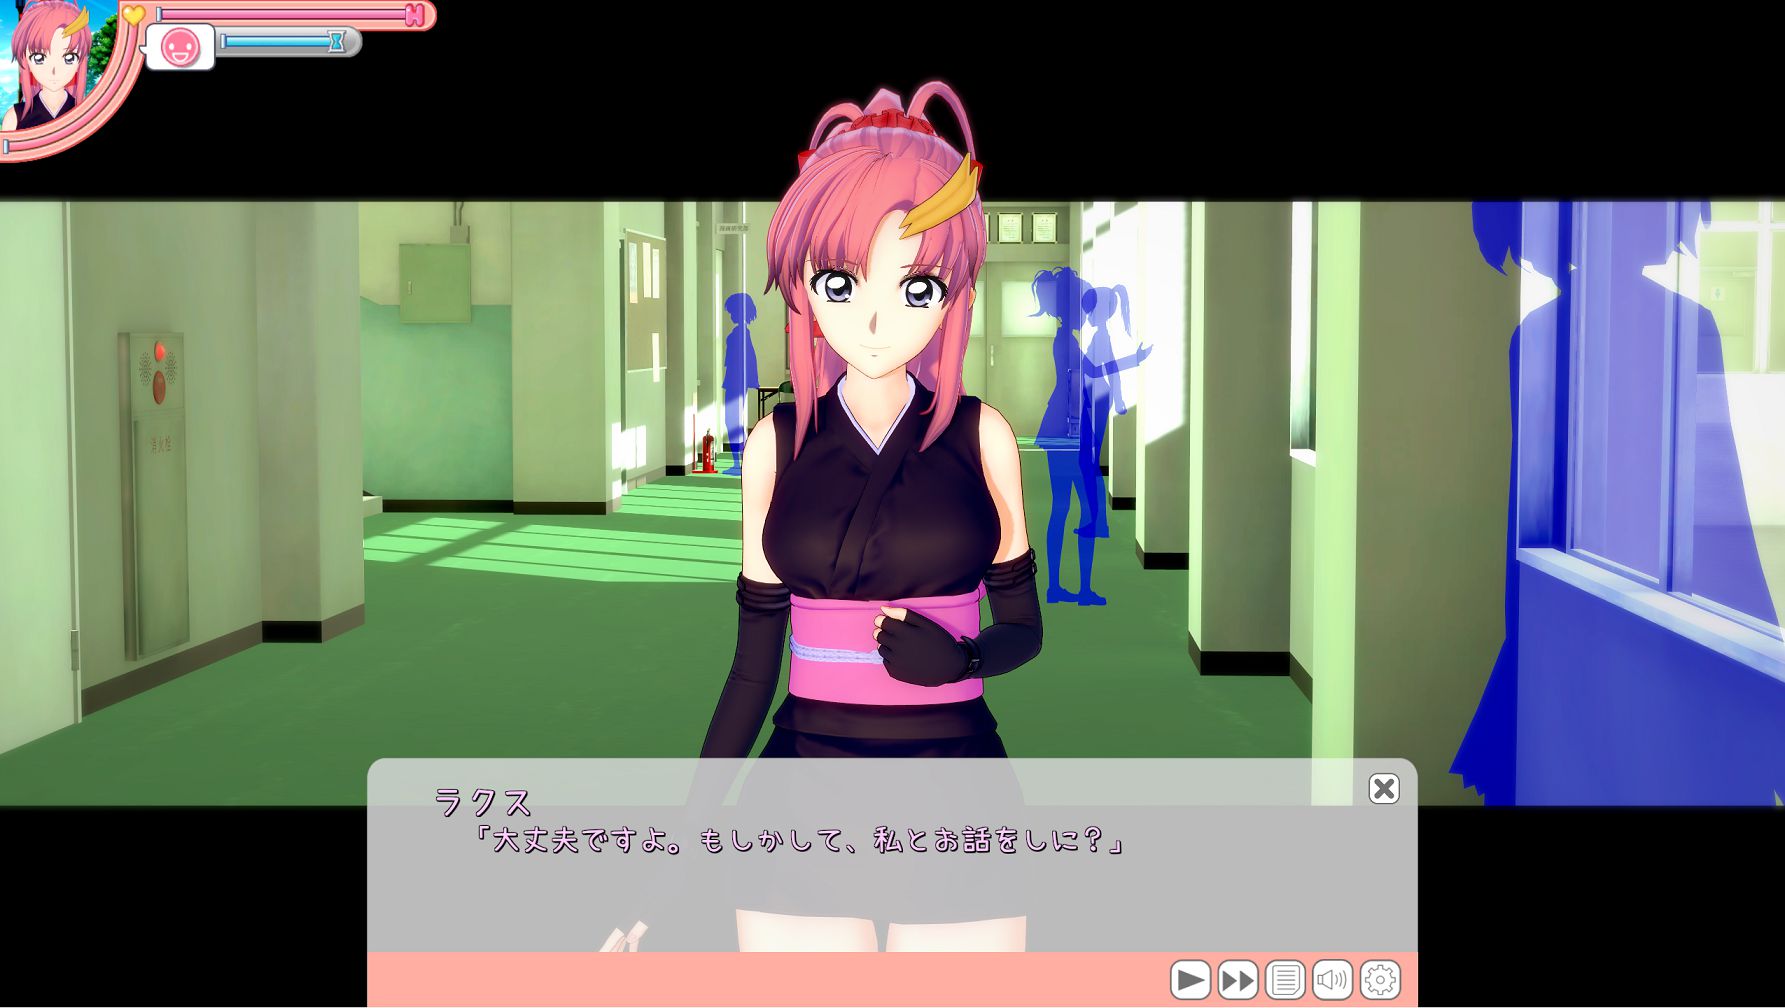 【Good news】Eroge "Koikatsu", too much fun to etch with characters of famous anime games wwwwwww 2